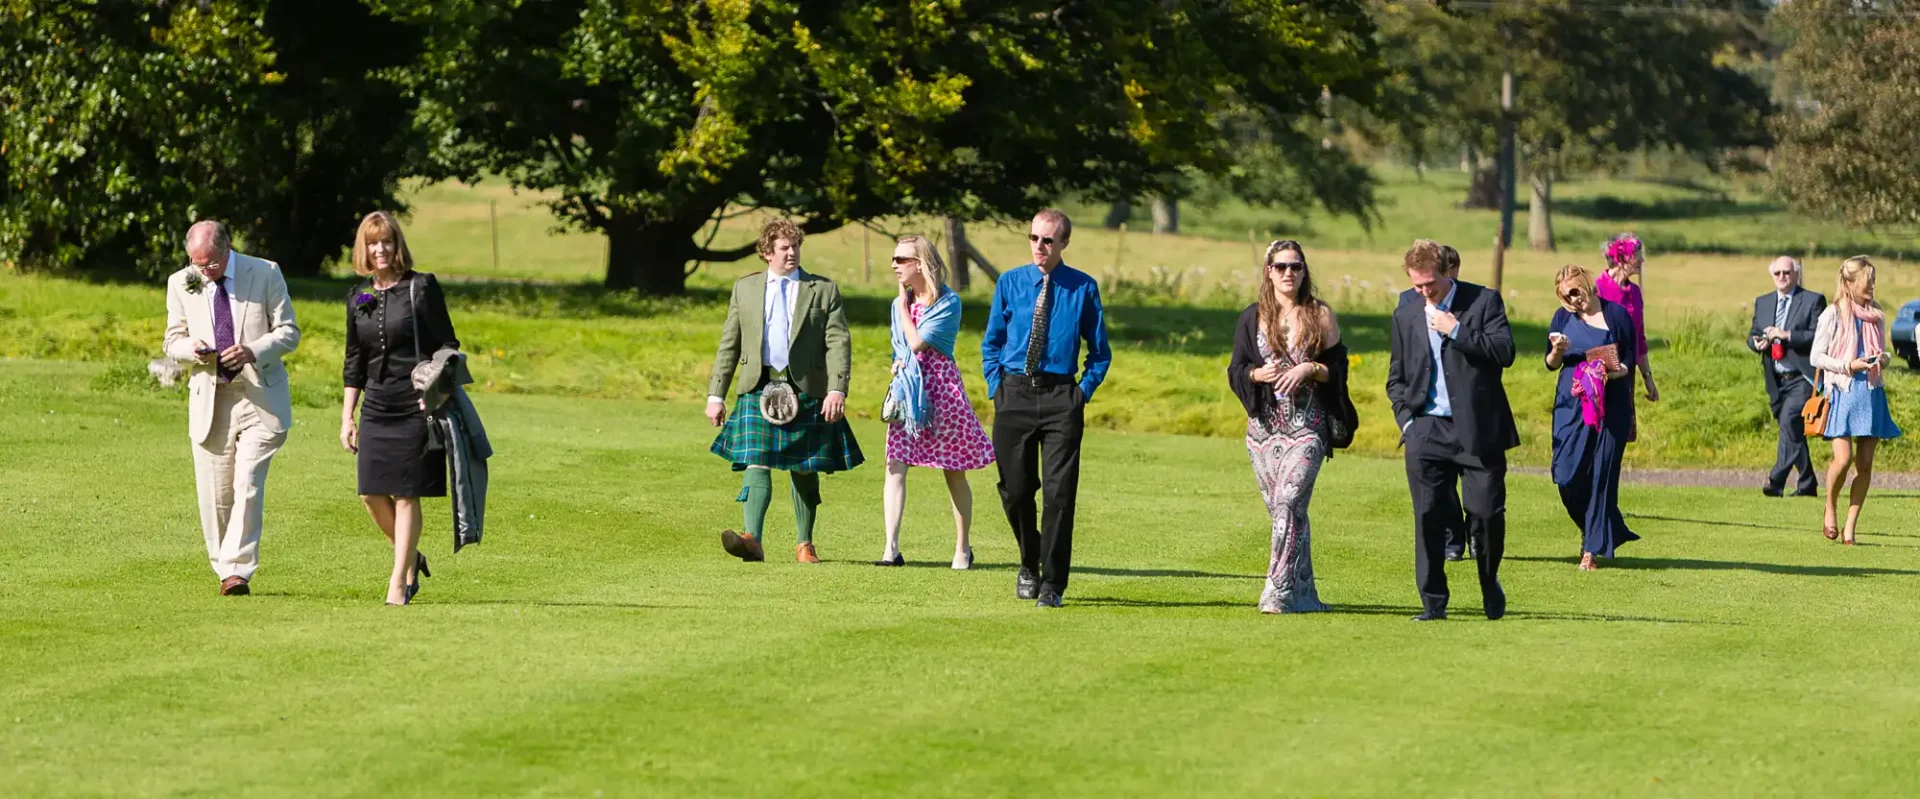 A group of elegantly dressed adults walks across a green lawn, each carrying different accessories, under a clear sky.